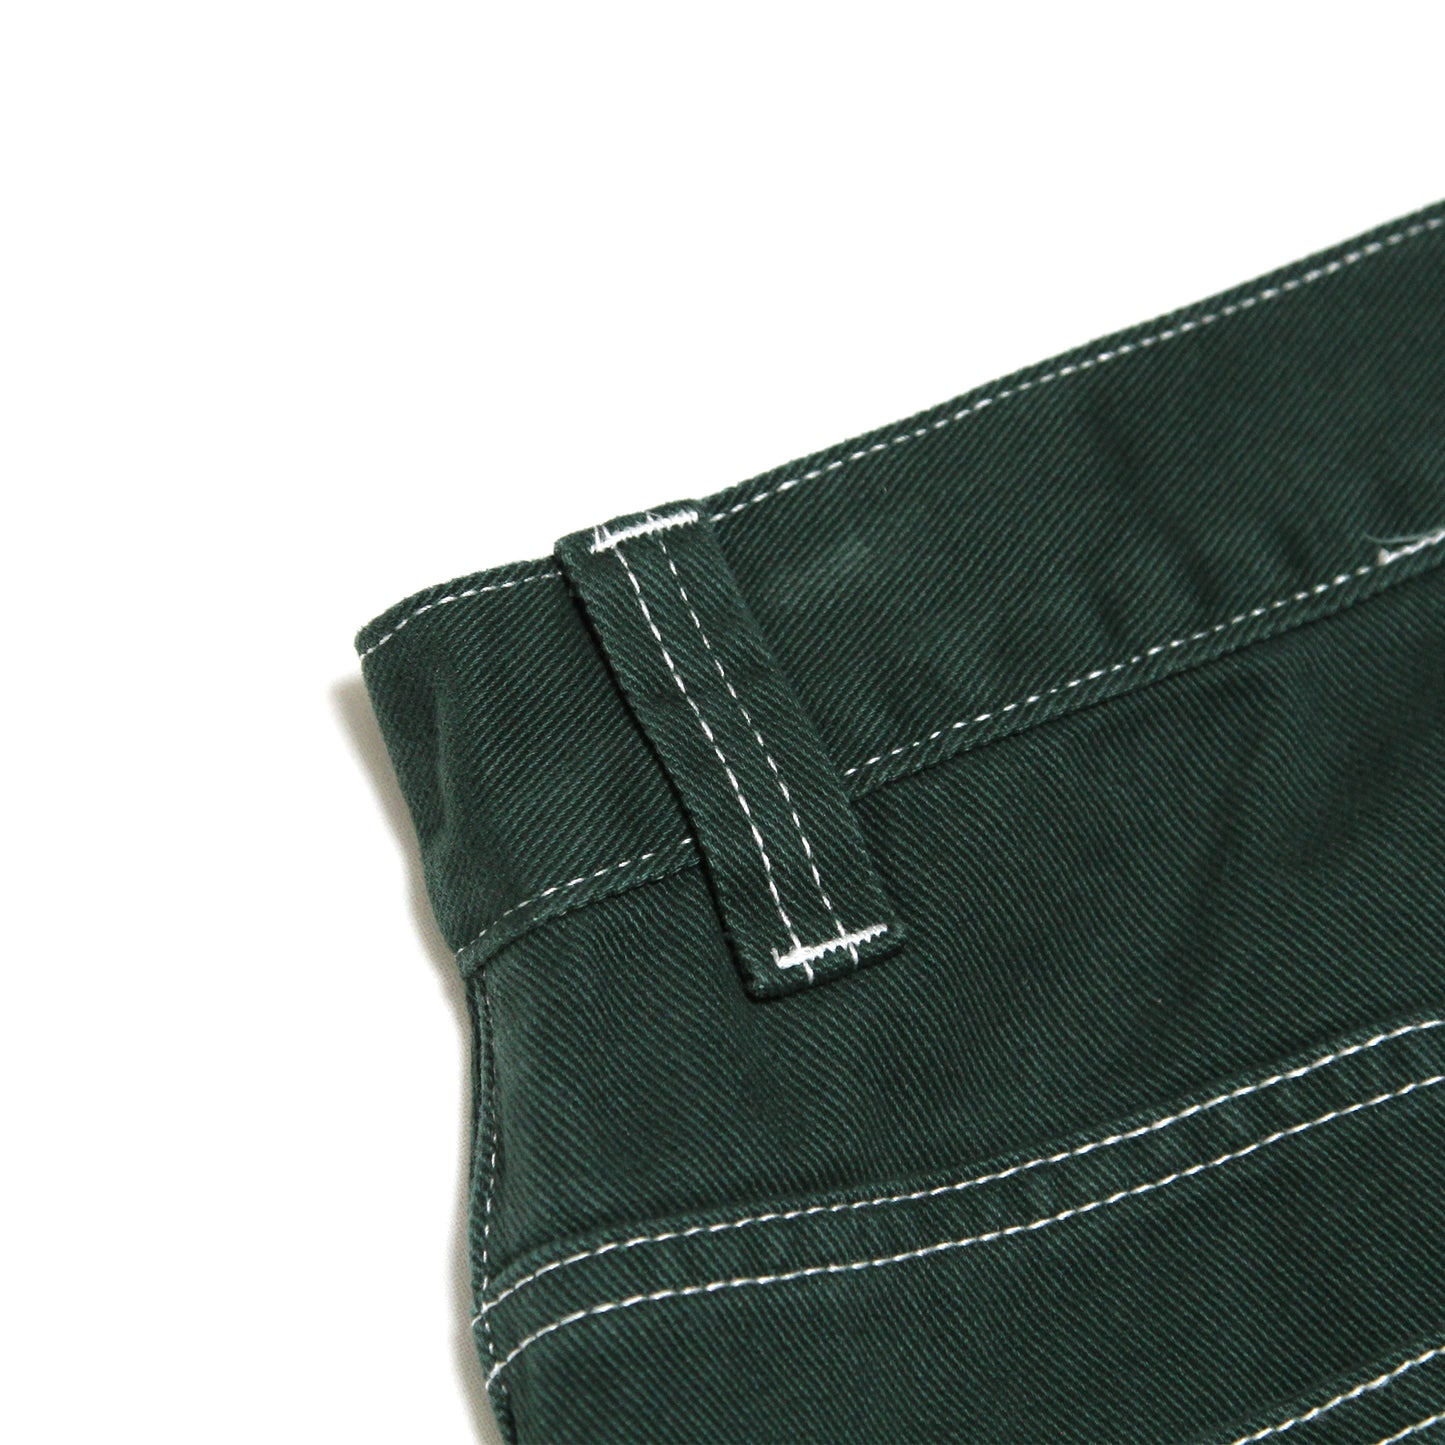 HEAVIES - 06 Jeans/Washed Green